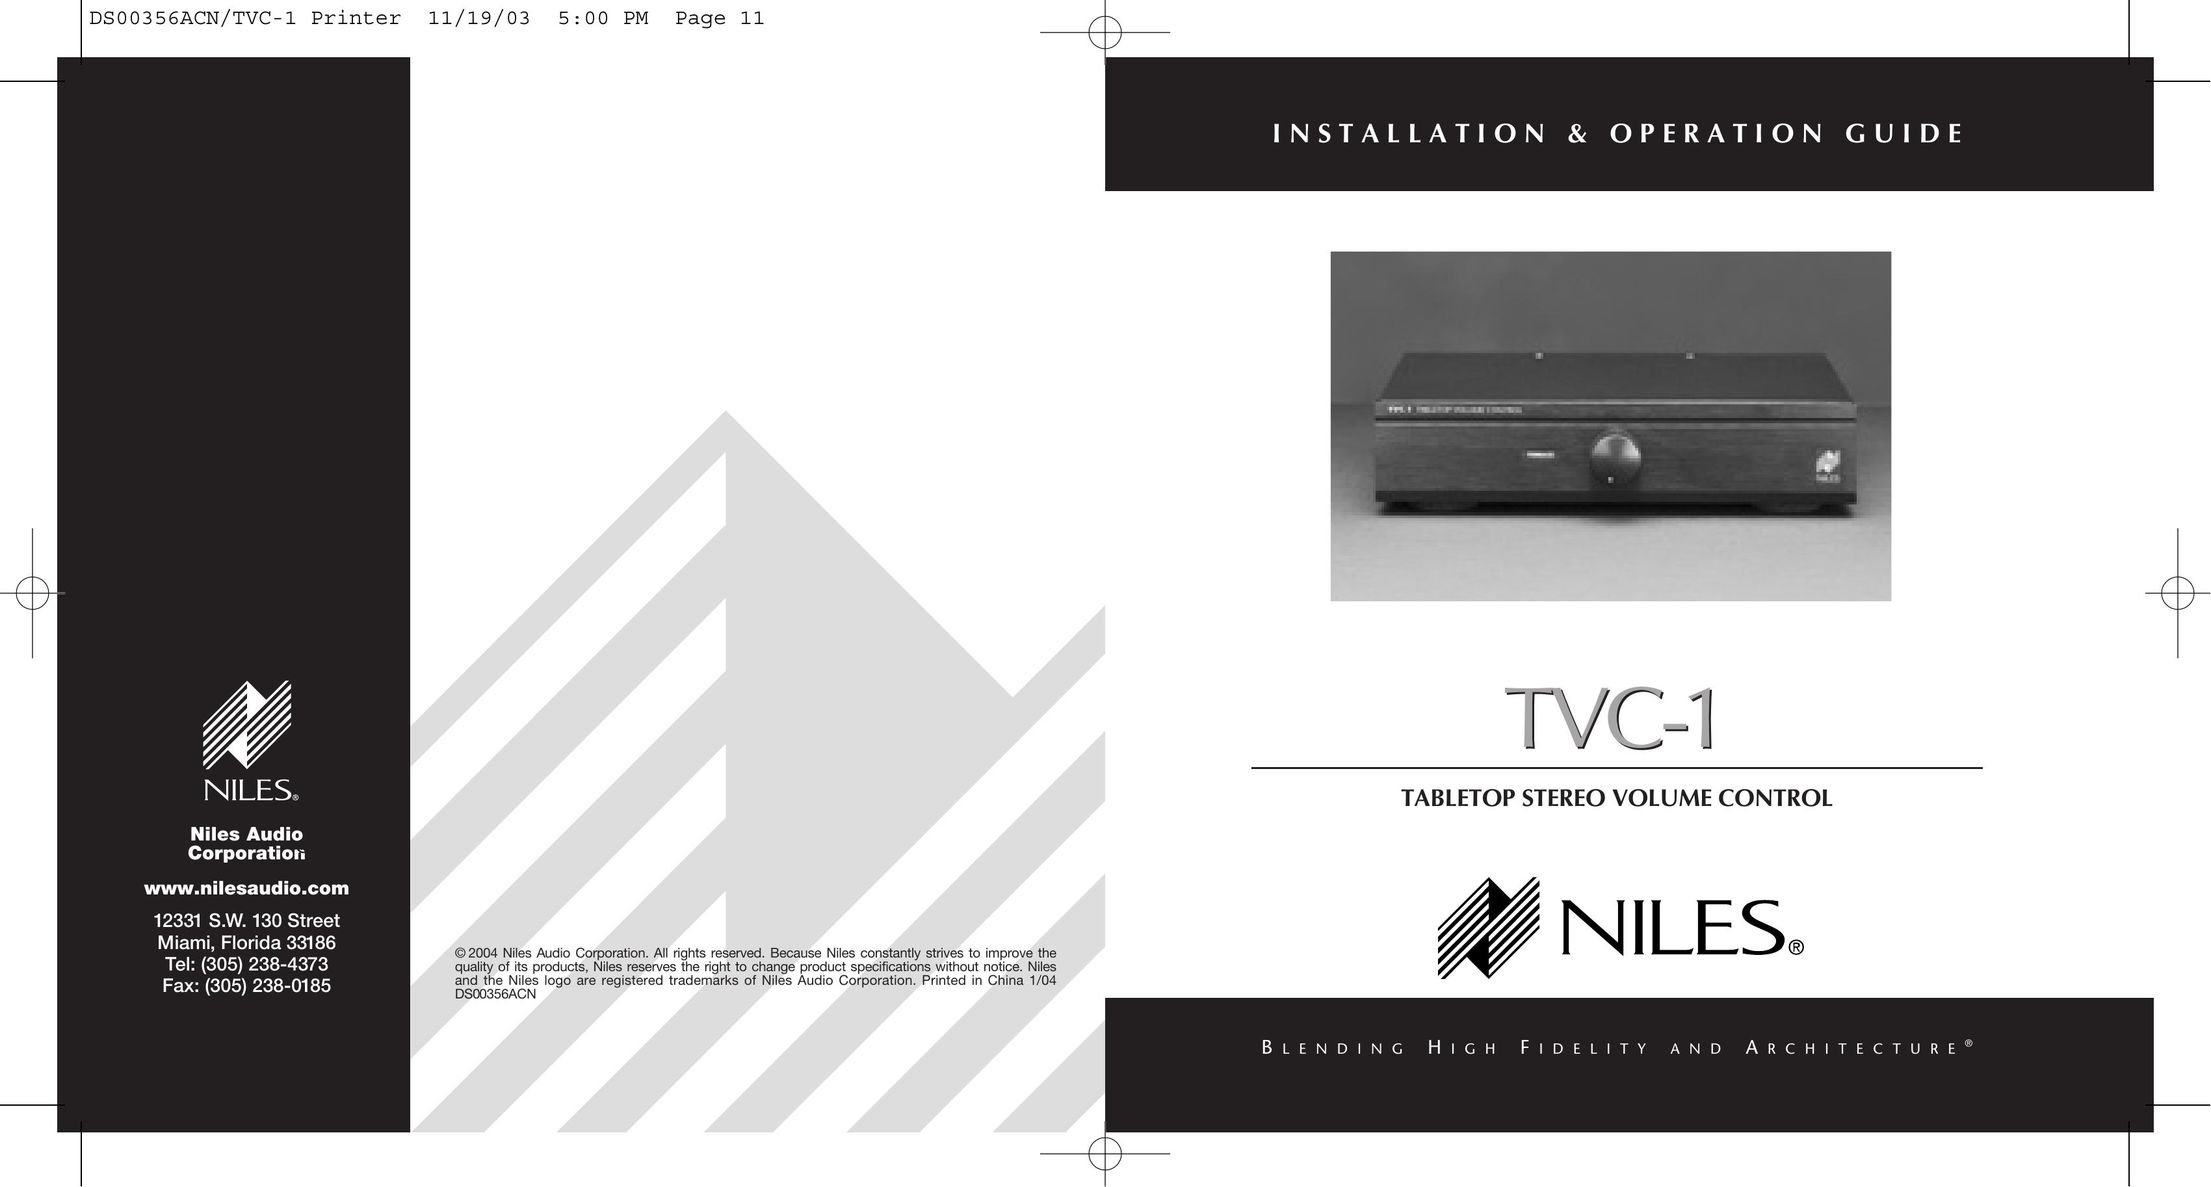 Niles Audio DS00356ACN Stereo System User Manual